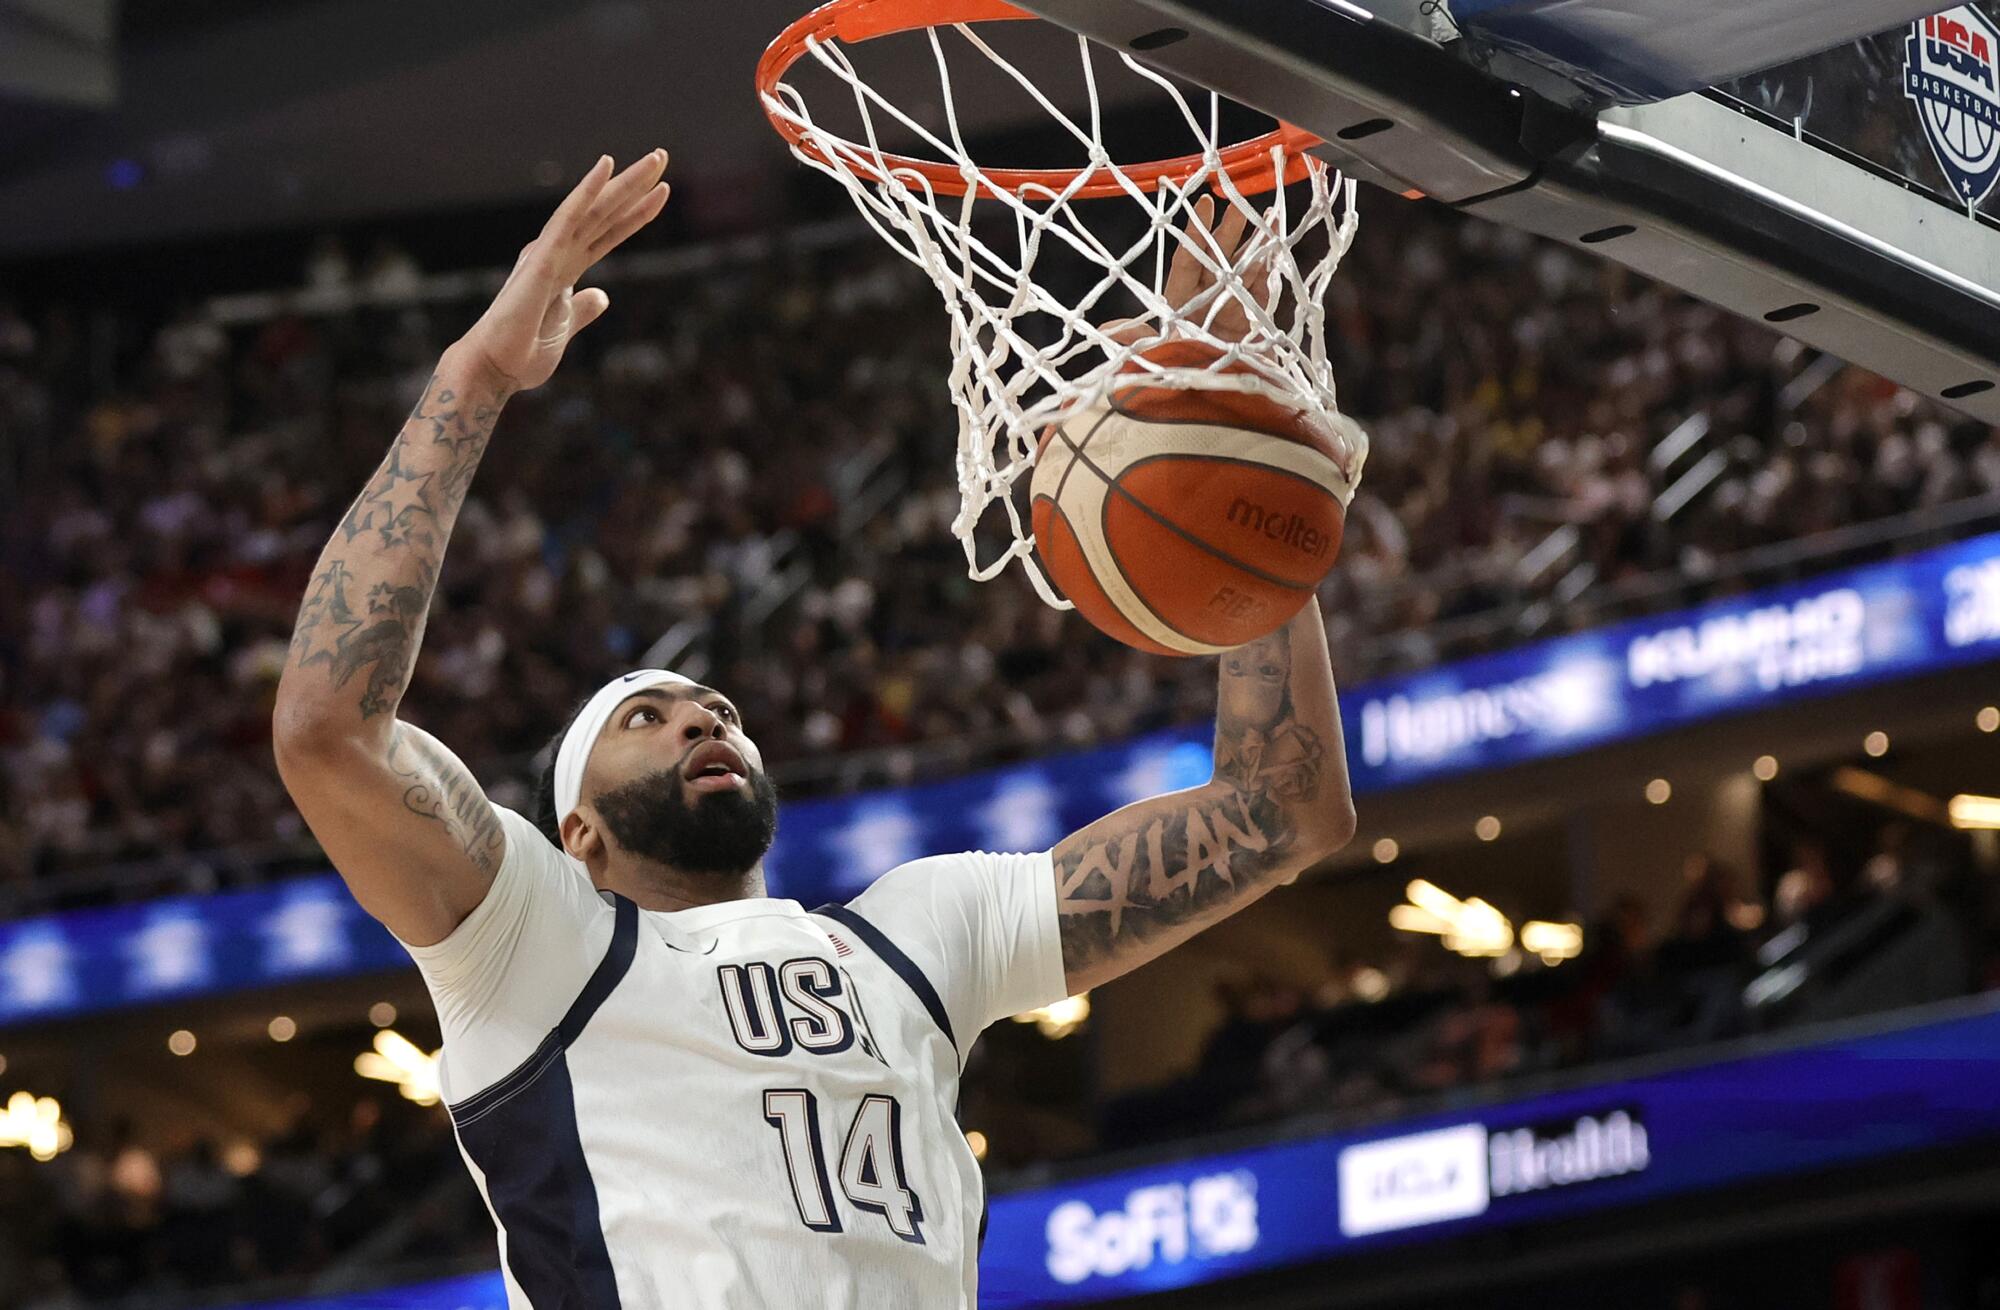 Lakers forward Anthony Davis hangs at the rim after dunking against Canada in an exhibition game Wednesday in Las Vegas.